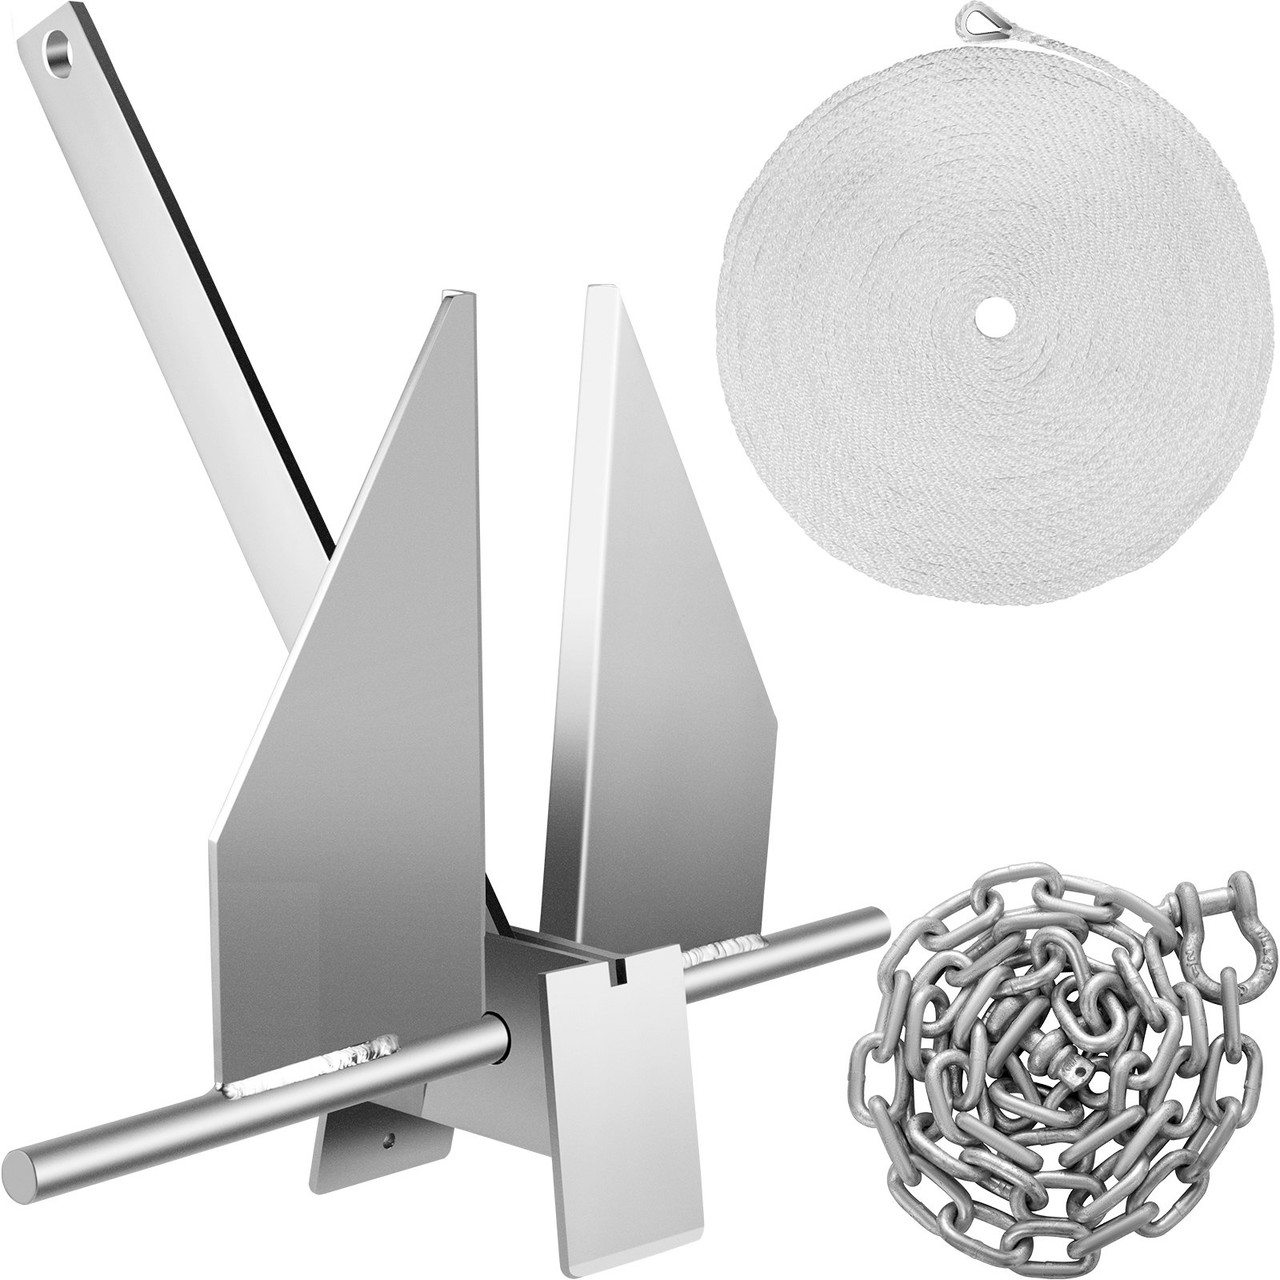 Boat Anchor Kit 13 lb Fluke Style Anchor, Hot Dipped Galvanized Steel Fluke Anchor, Marine Anchor with Anchor, Rope, Shackles, Chain for Boat Mooring on The Beach, Boats from 20'-32'